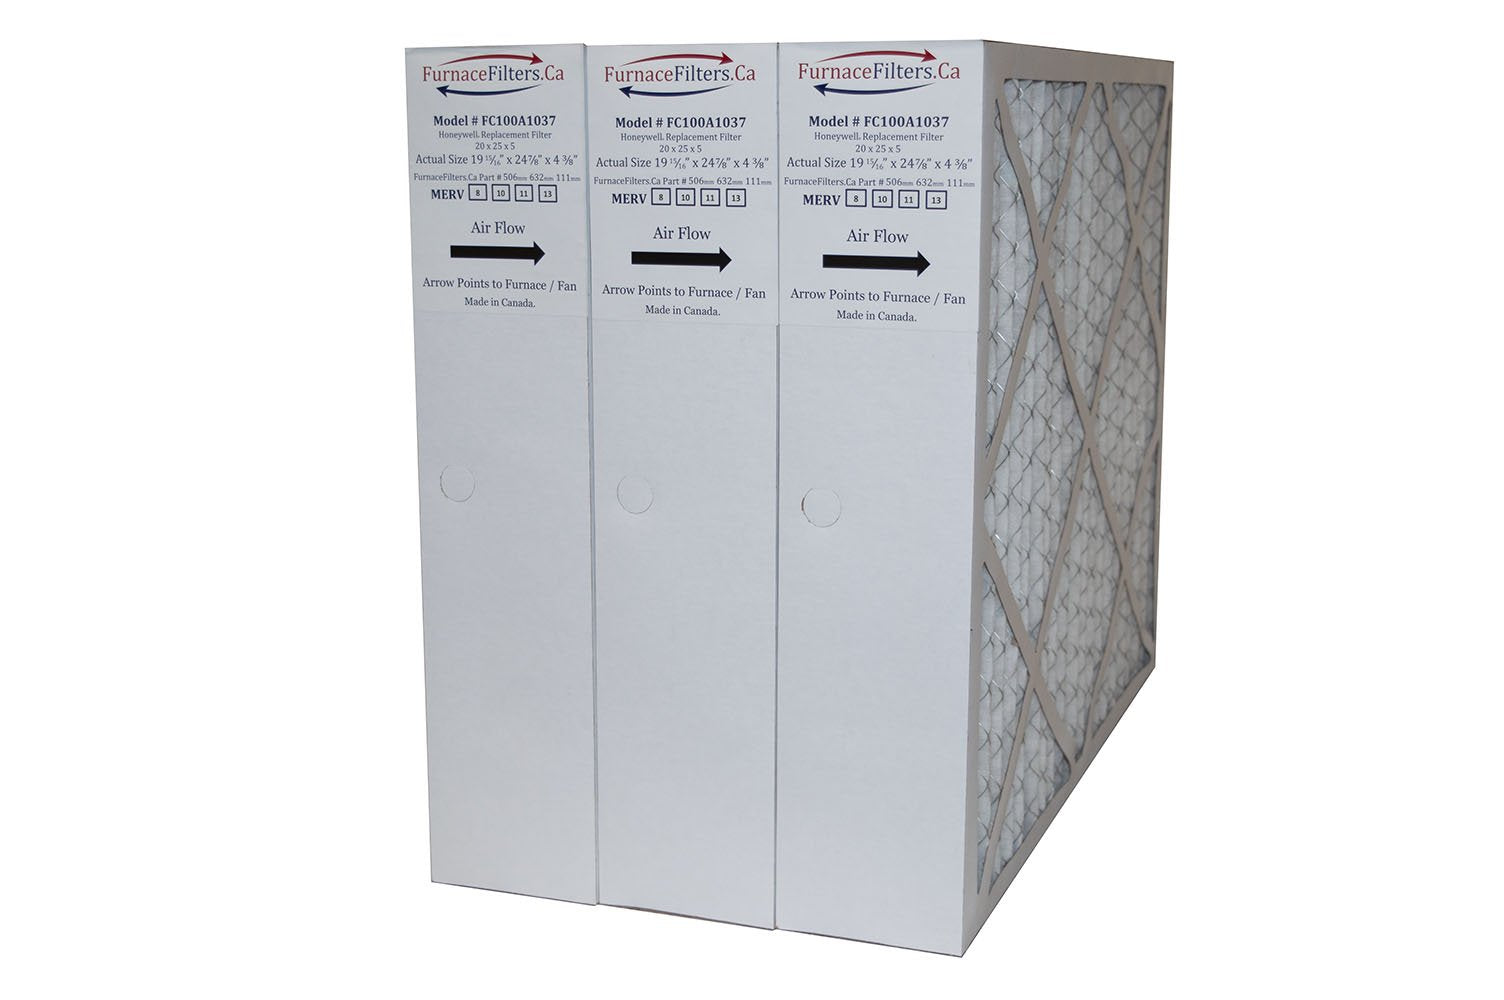 Honeywell 20x25x4 Furnace Filter Model # FC100A1037 MERV 11. Actual Size 19 15/16 x 24 7/8 x 4 3/8. Made in Canada by Furnace Filters.Ca Pkg. of 3